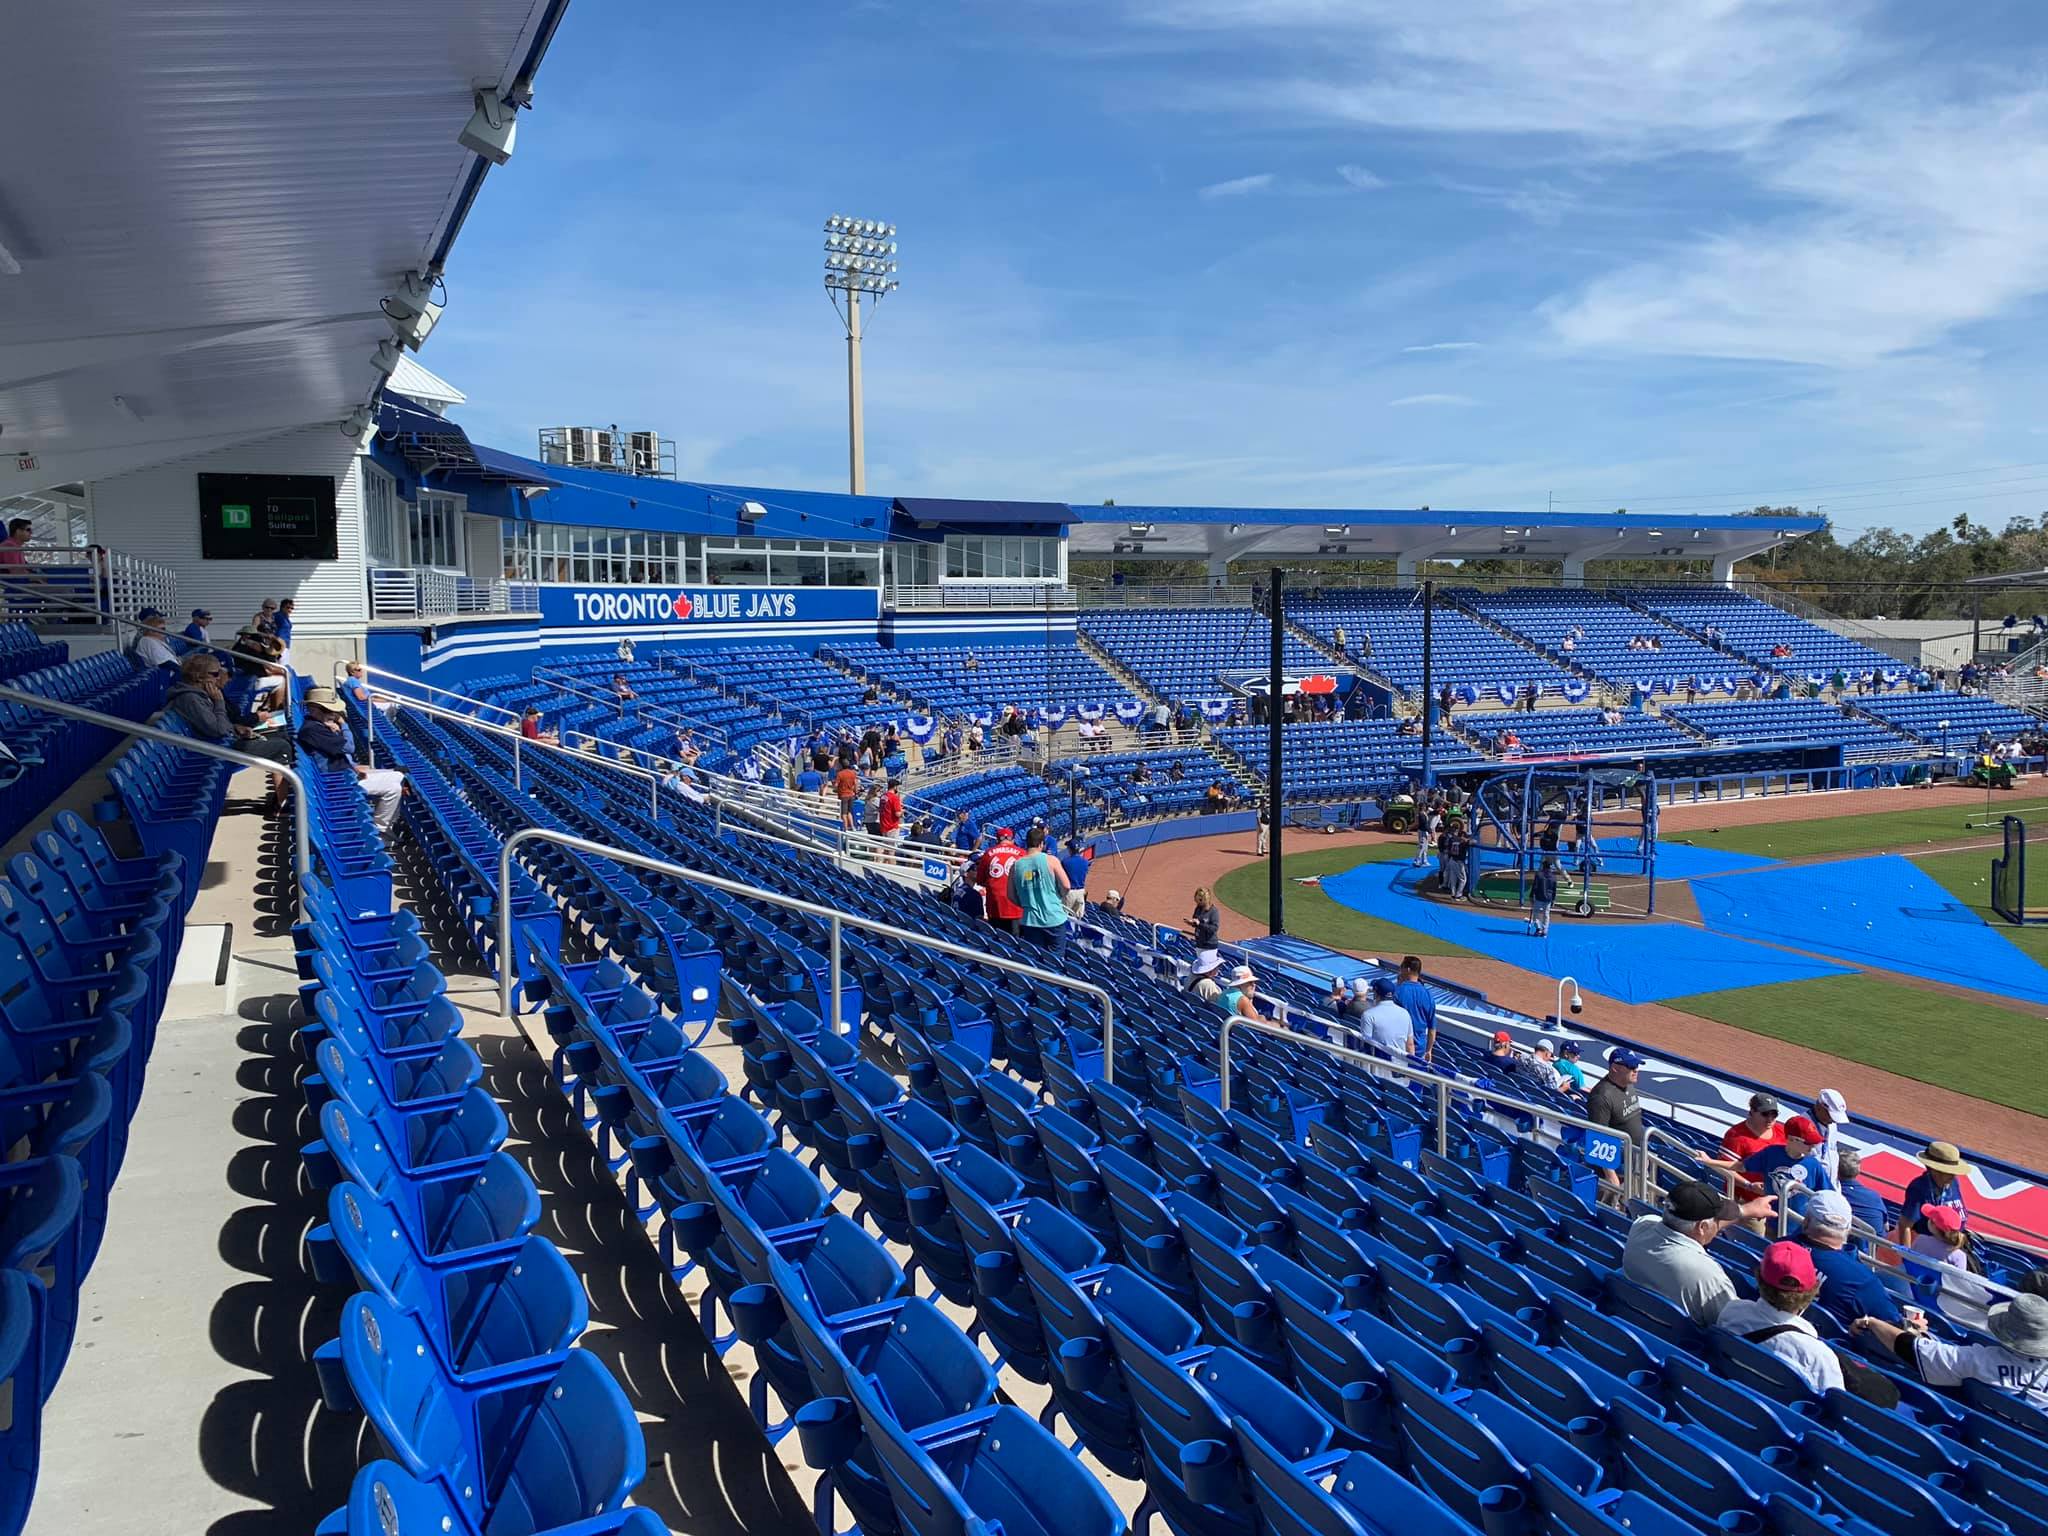 Blue Jays renovations start soon in Dunedin. What about spring